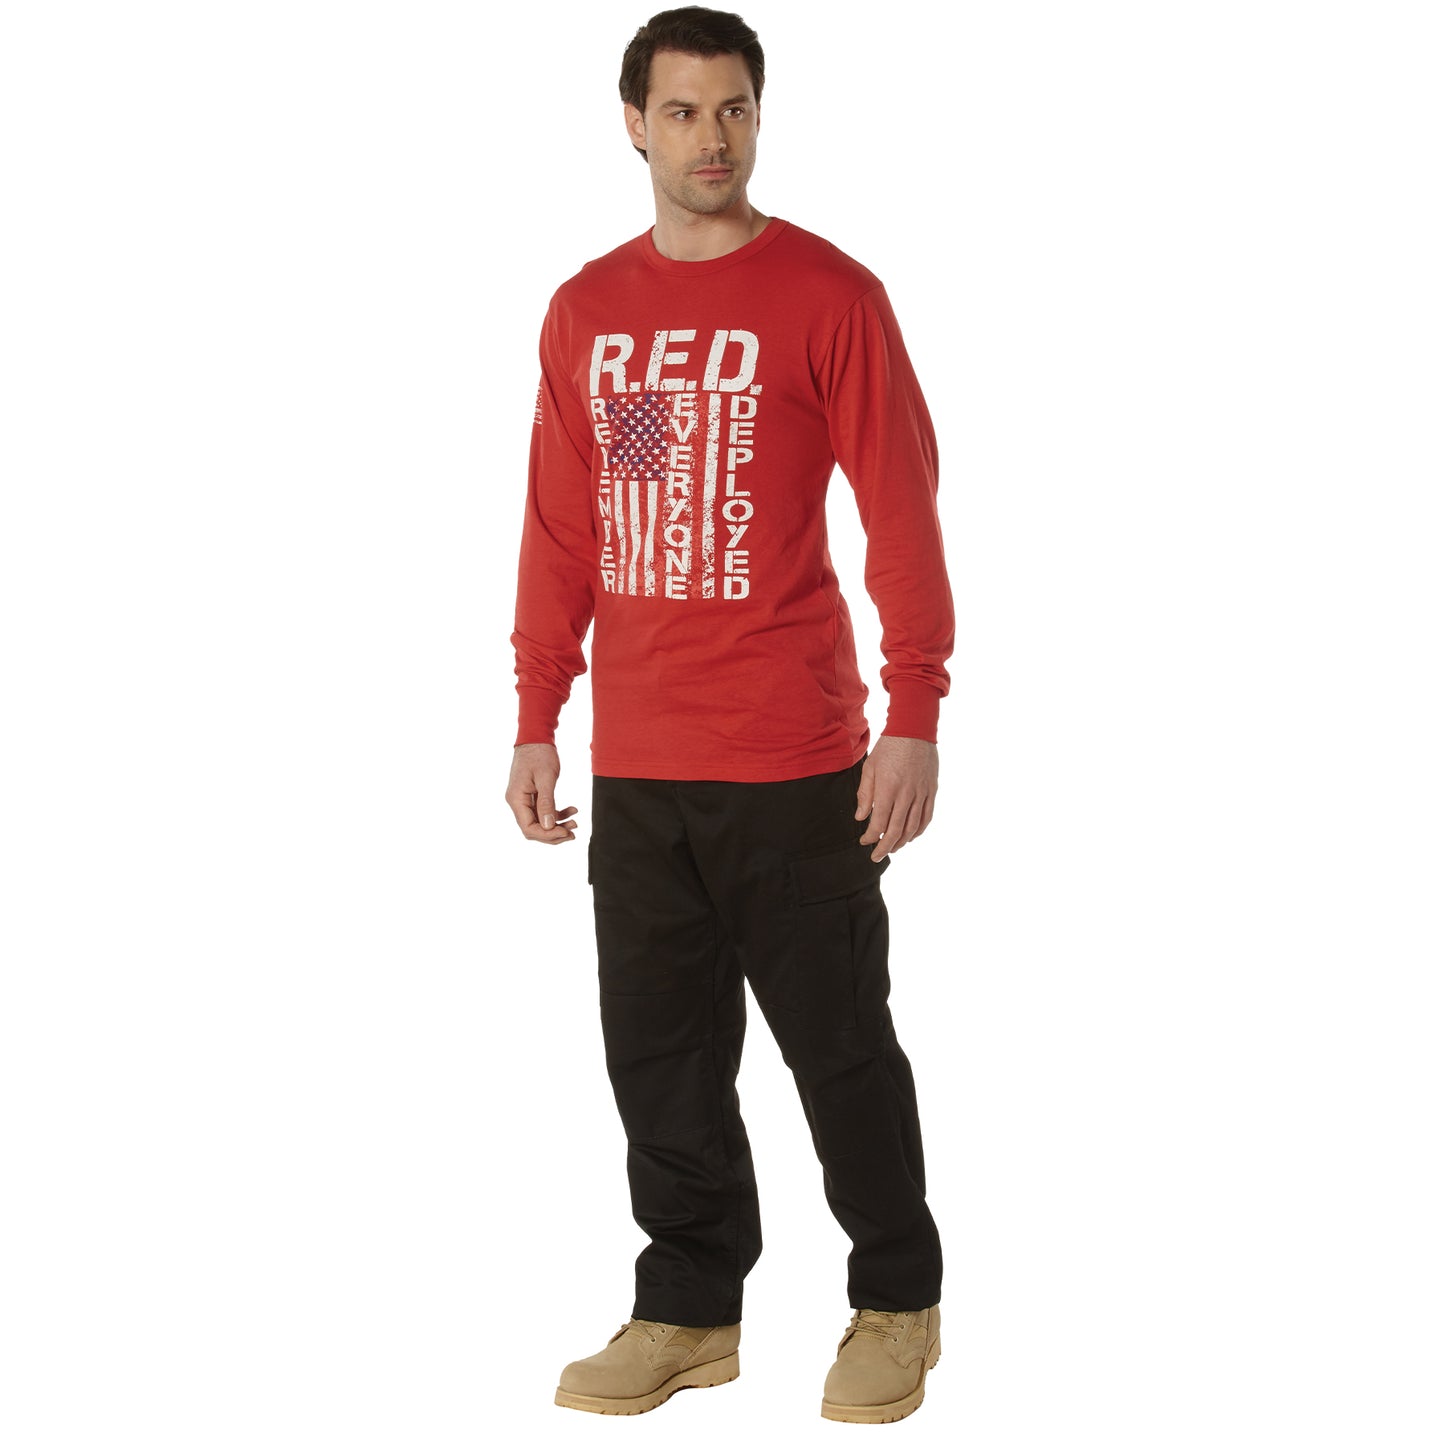 Wild West R.E.D. (Remember Everyone Deployed) Long Sleeve T-Shirt